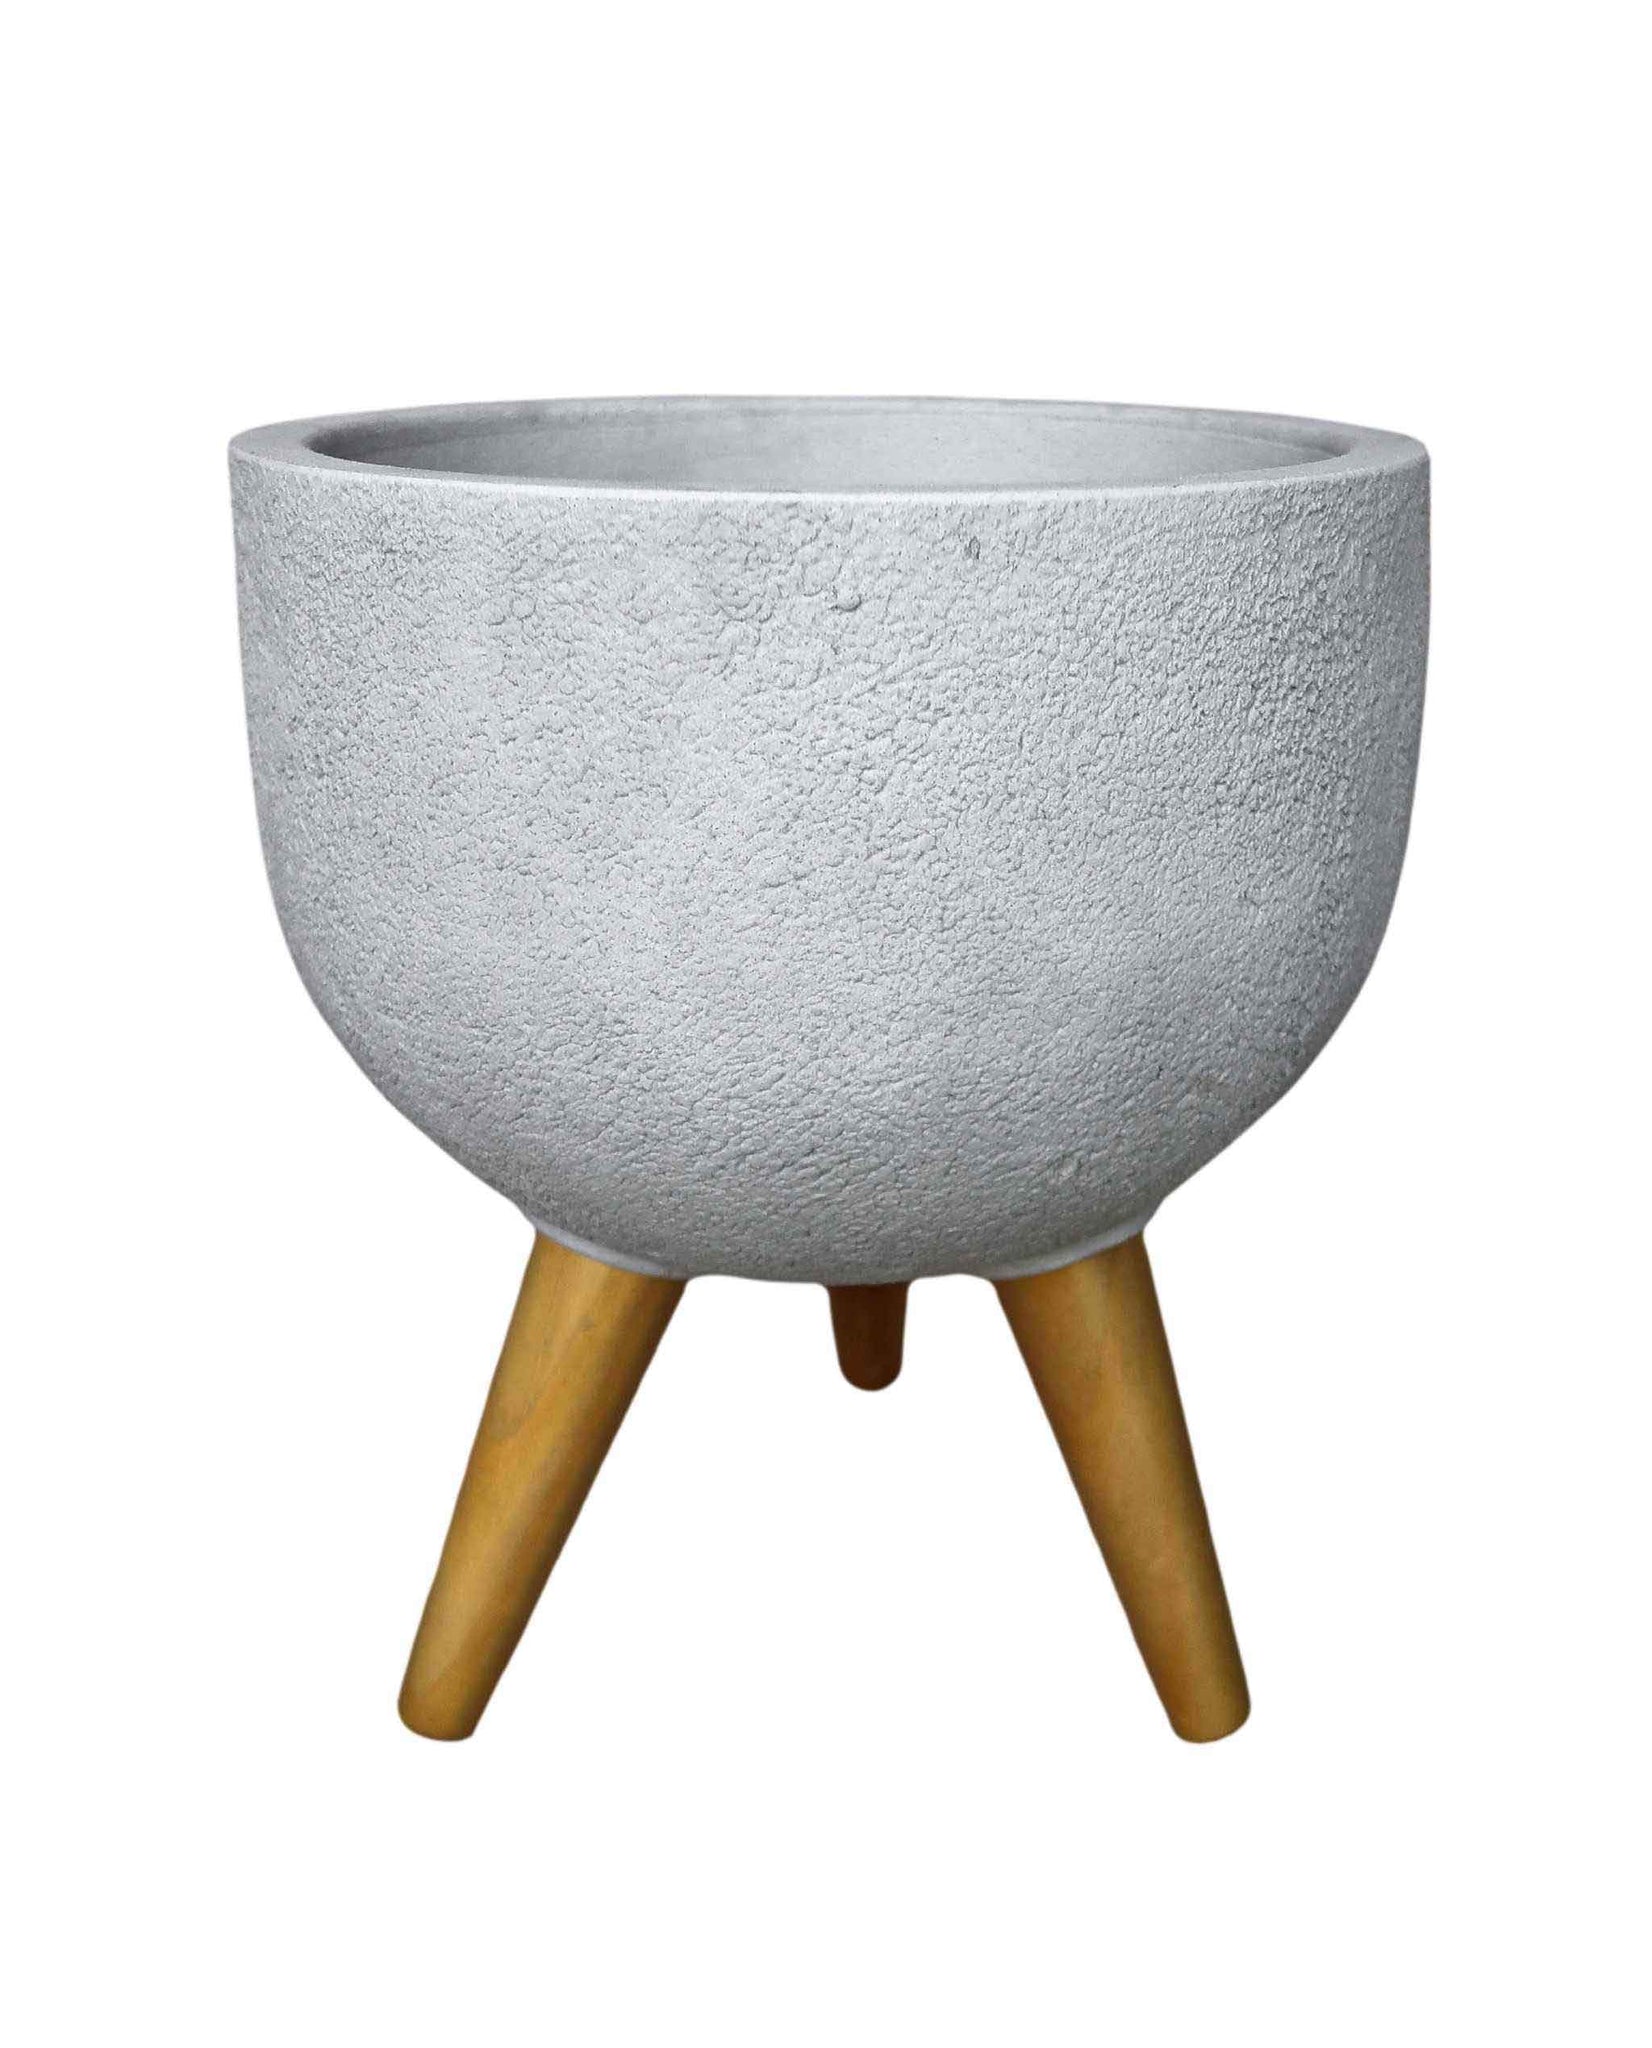 Rustic Round Japi Planter (CACHE POT) With Stand JVRD33